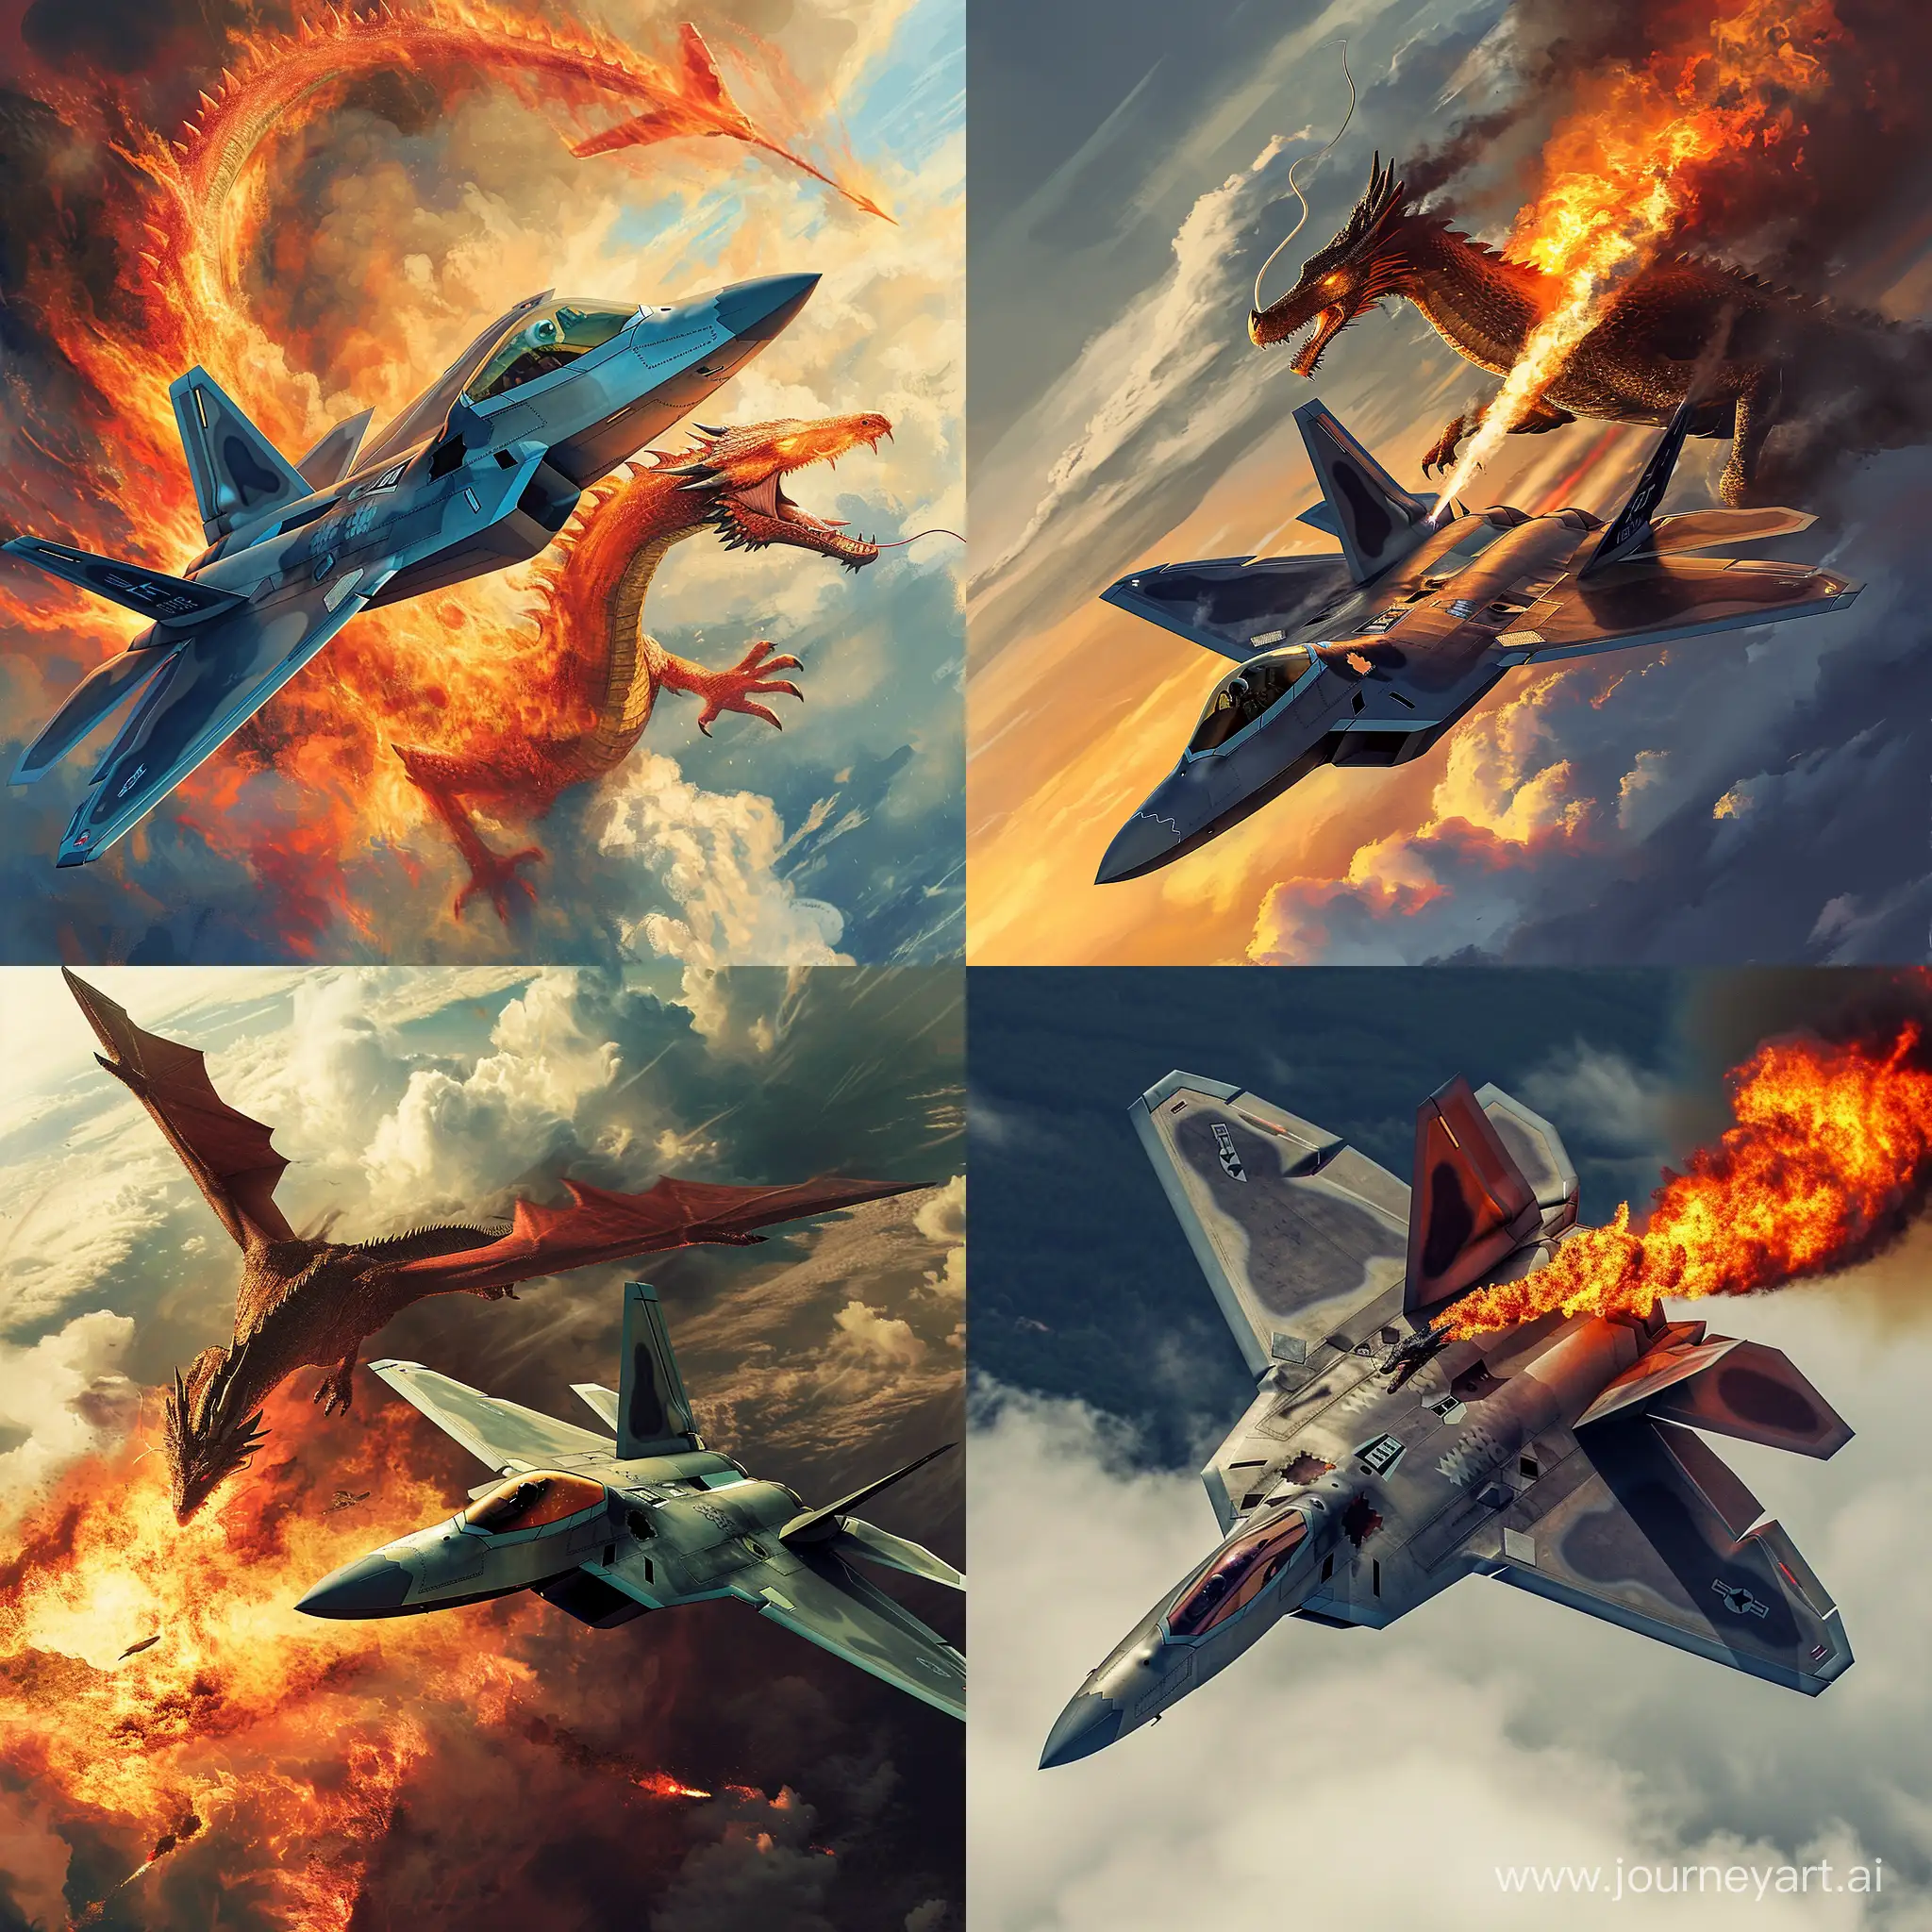 F22-Raptor-Engages-in-Aerial-Combat-with-Fire-Dragon